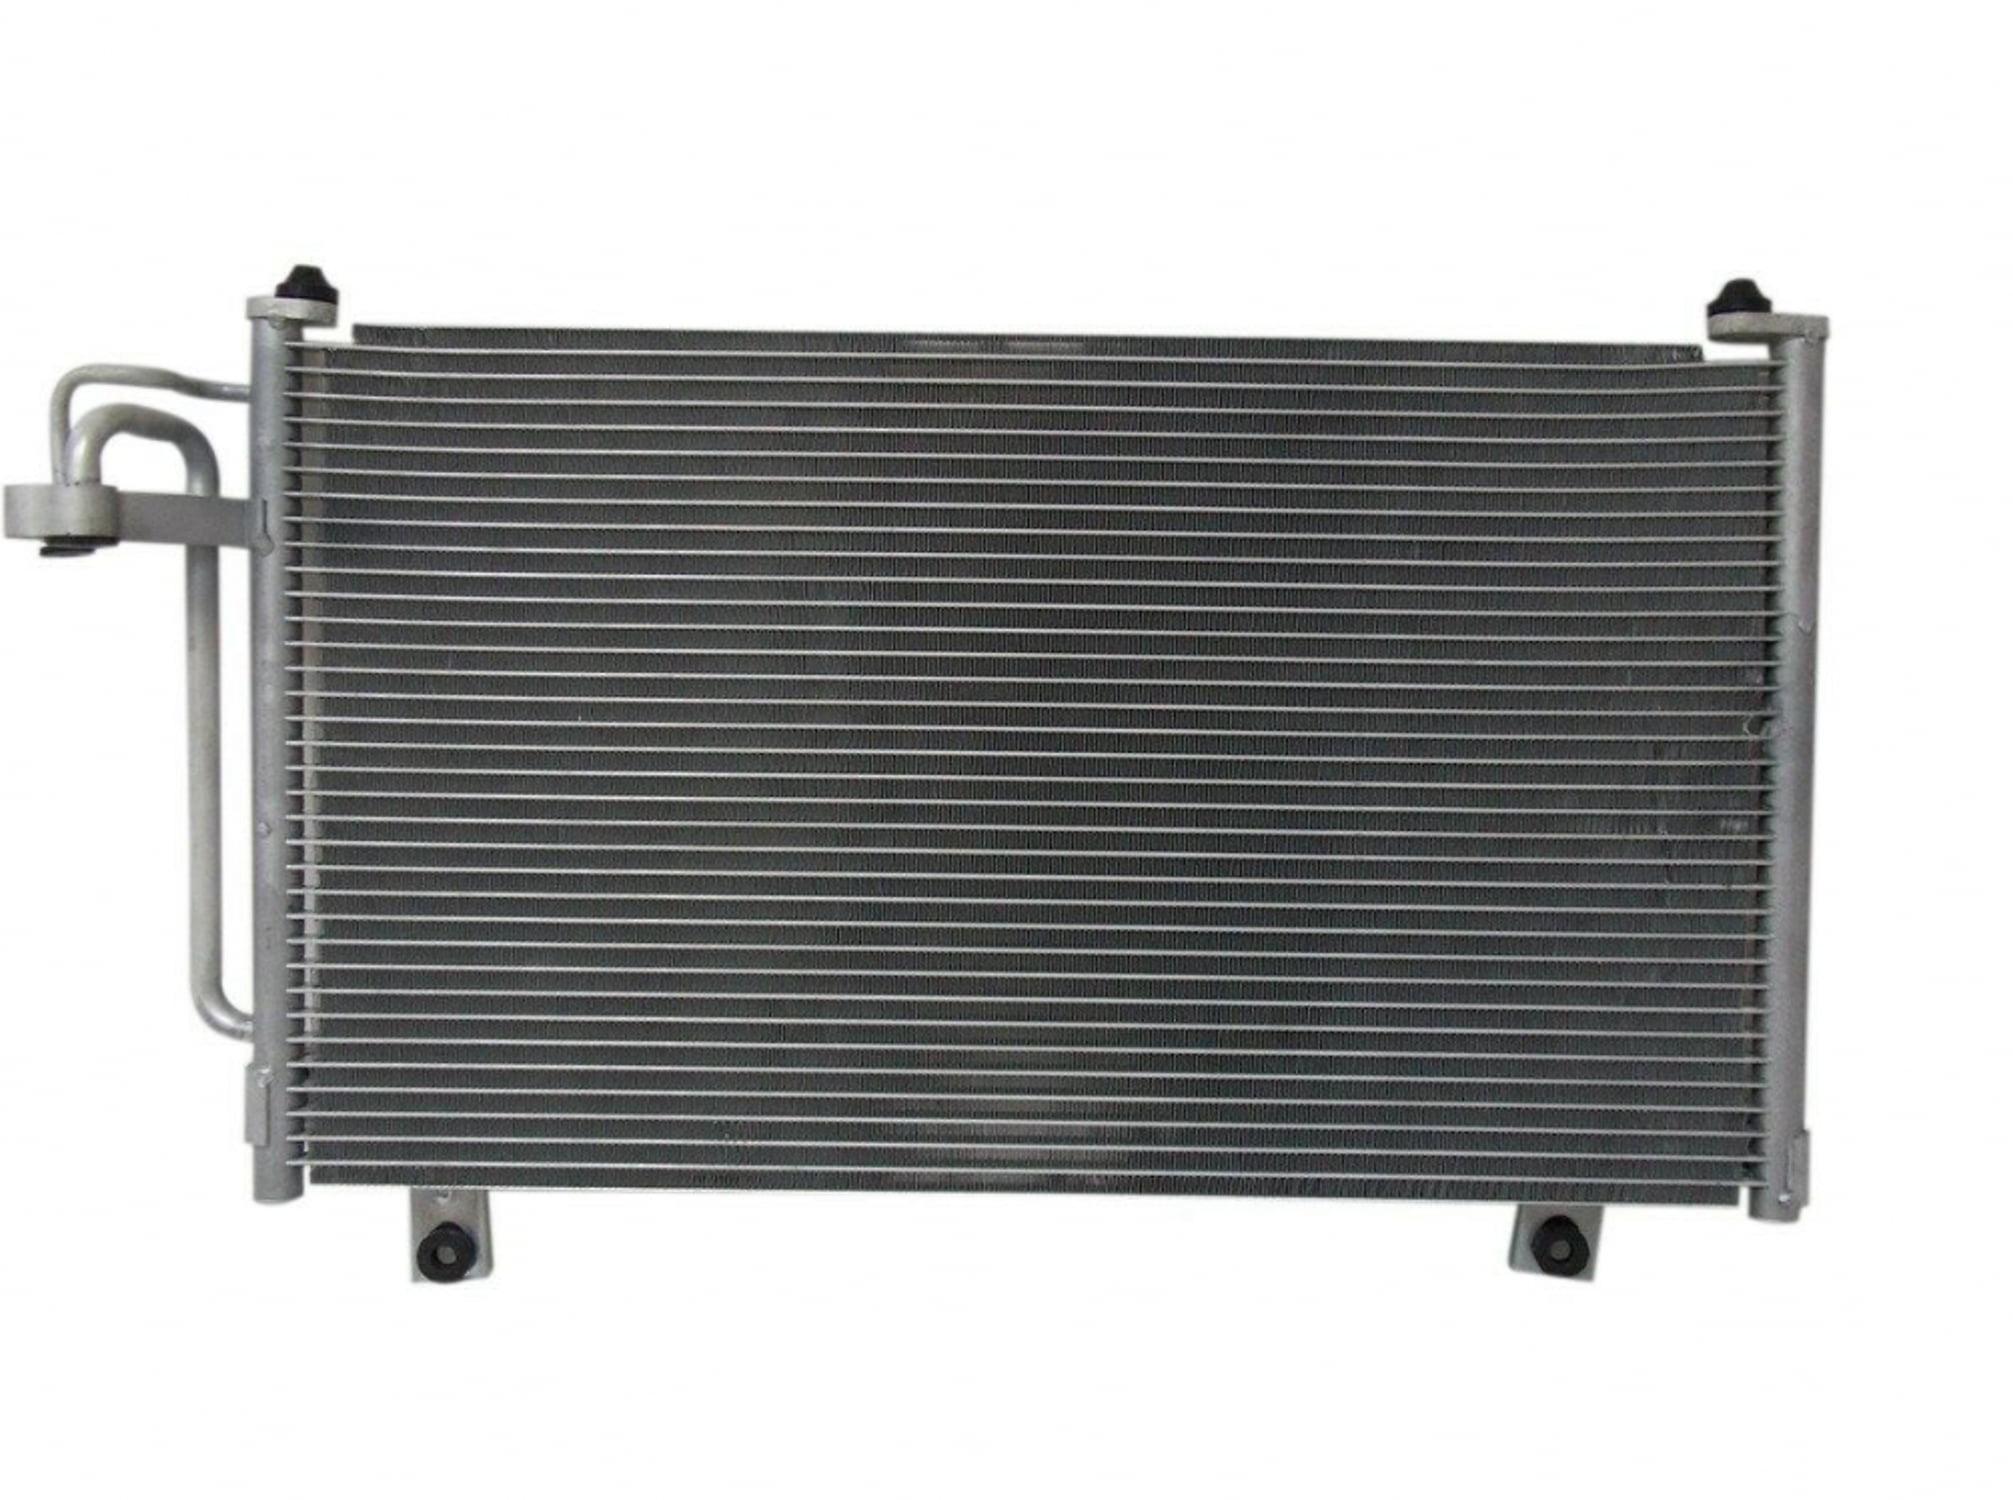 Details about   New A/C Condenser for Civic CRX